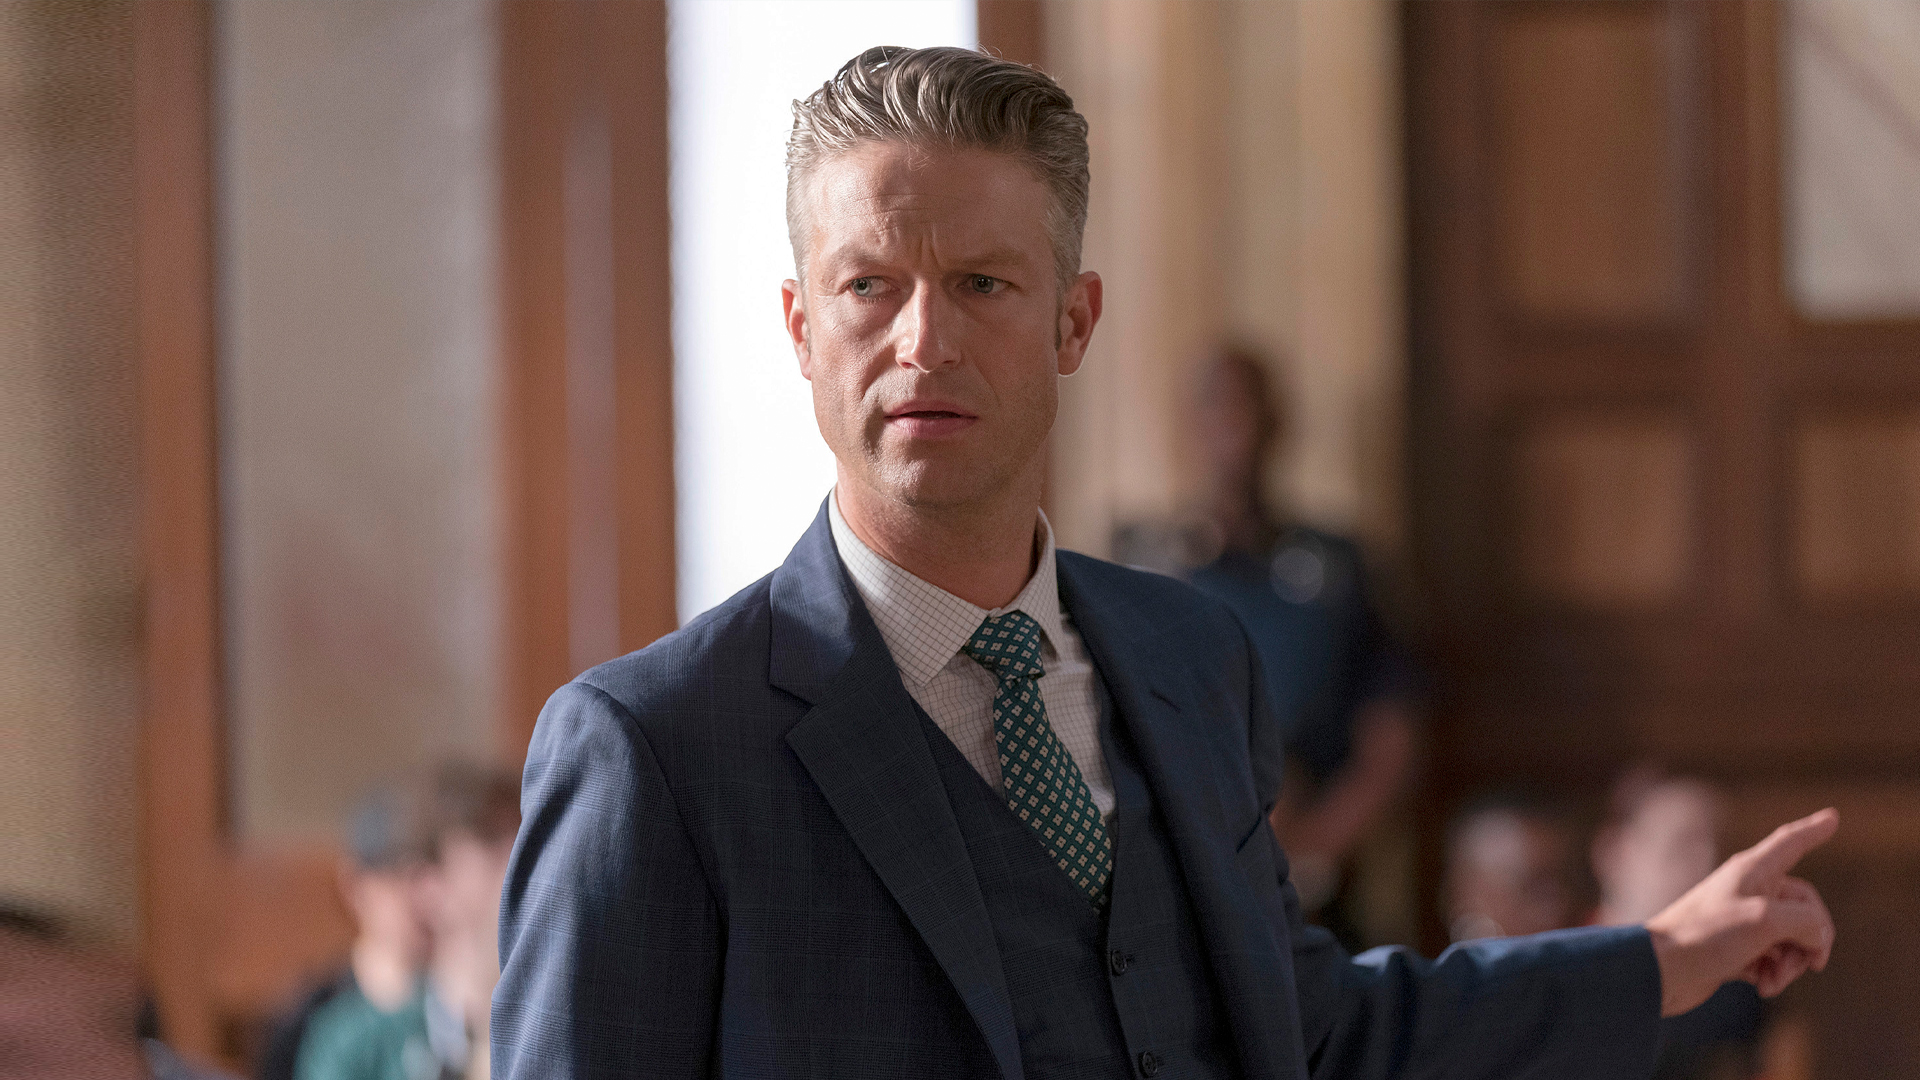 Uncover the character Peter Scanavino portrays on Law and Order with this must-read breakdown!